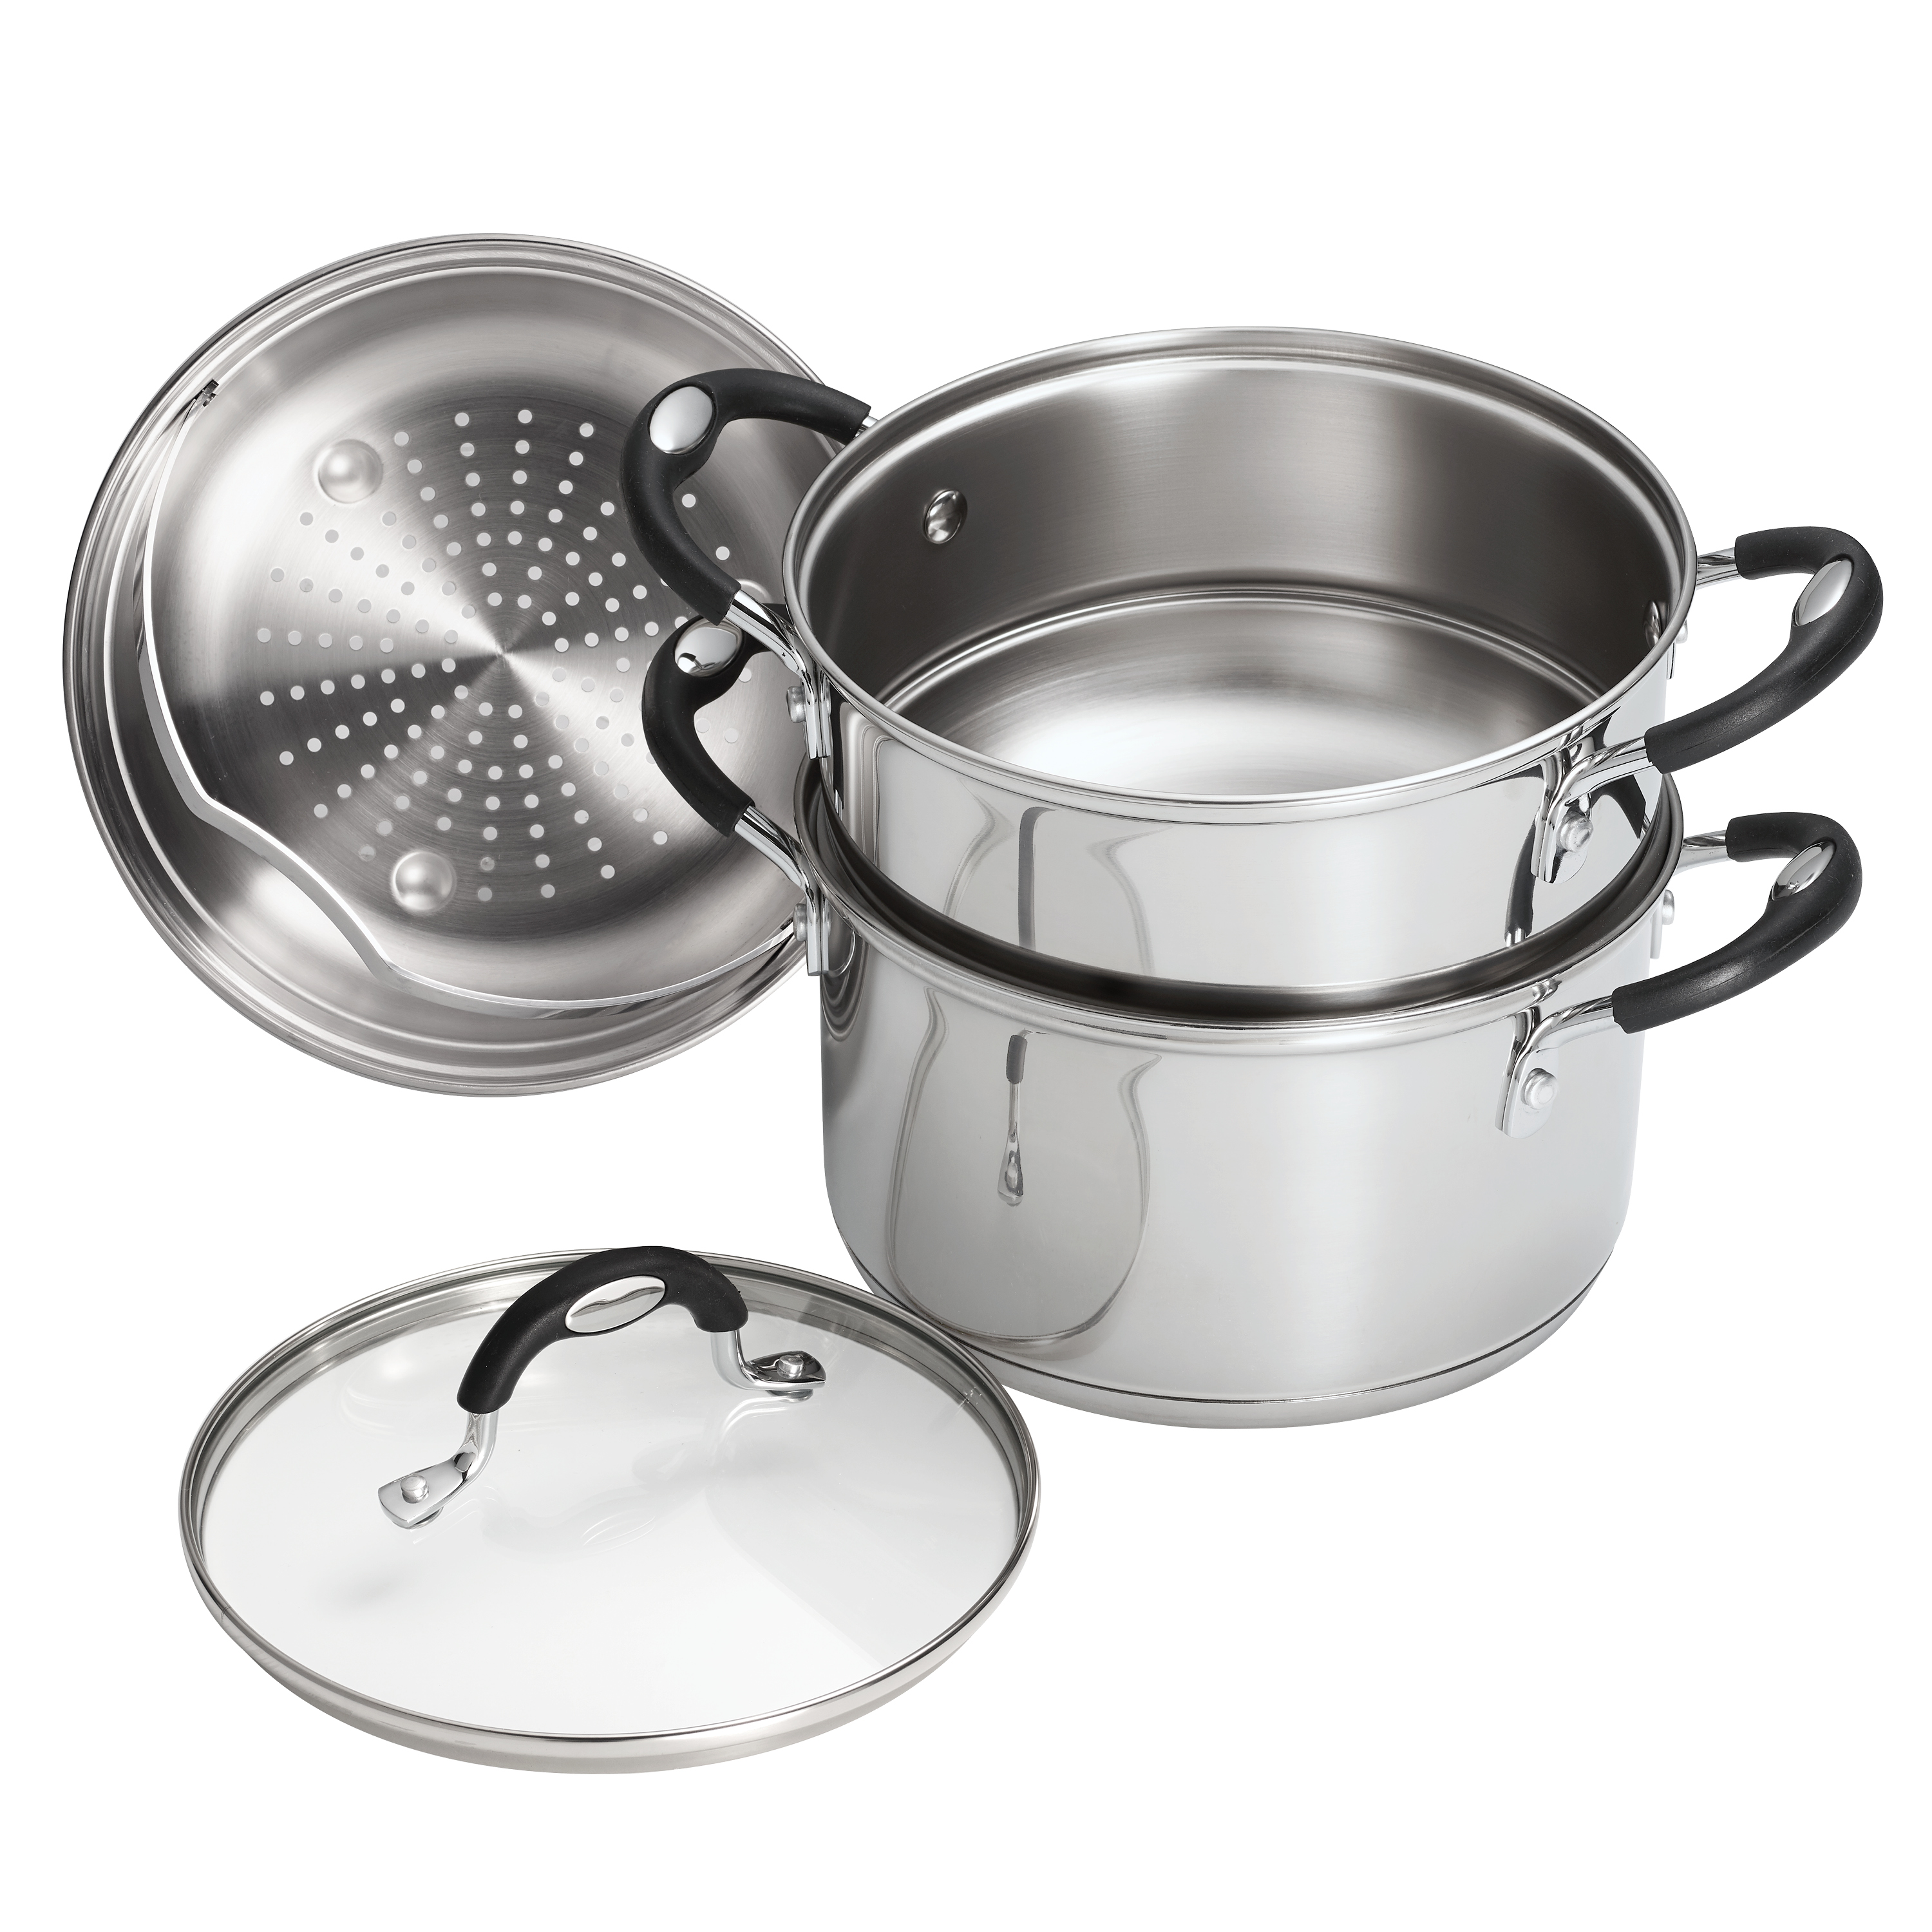 Tramontina Stainless Steel 3 Quart Steamer & Double-Boiler, 4 Piece - image 1 of 11